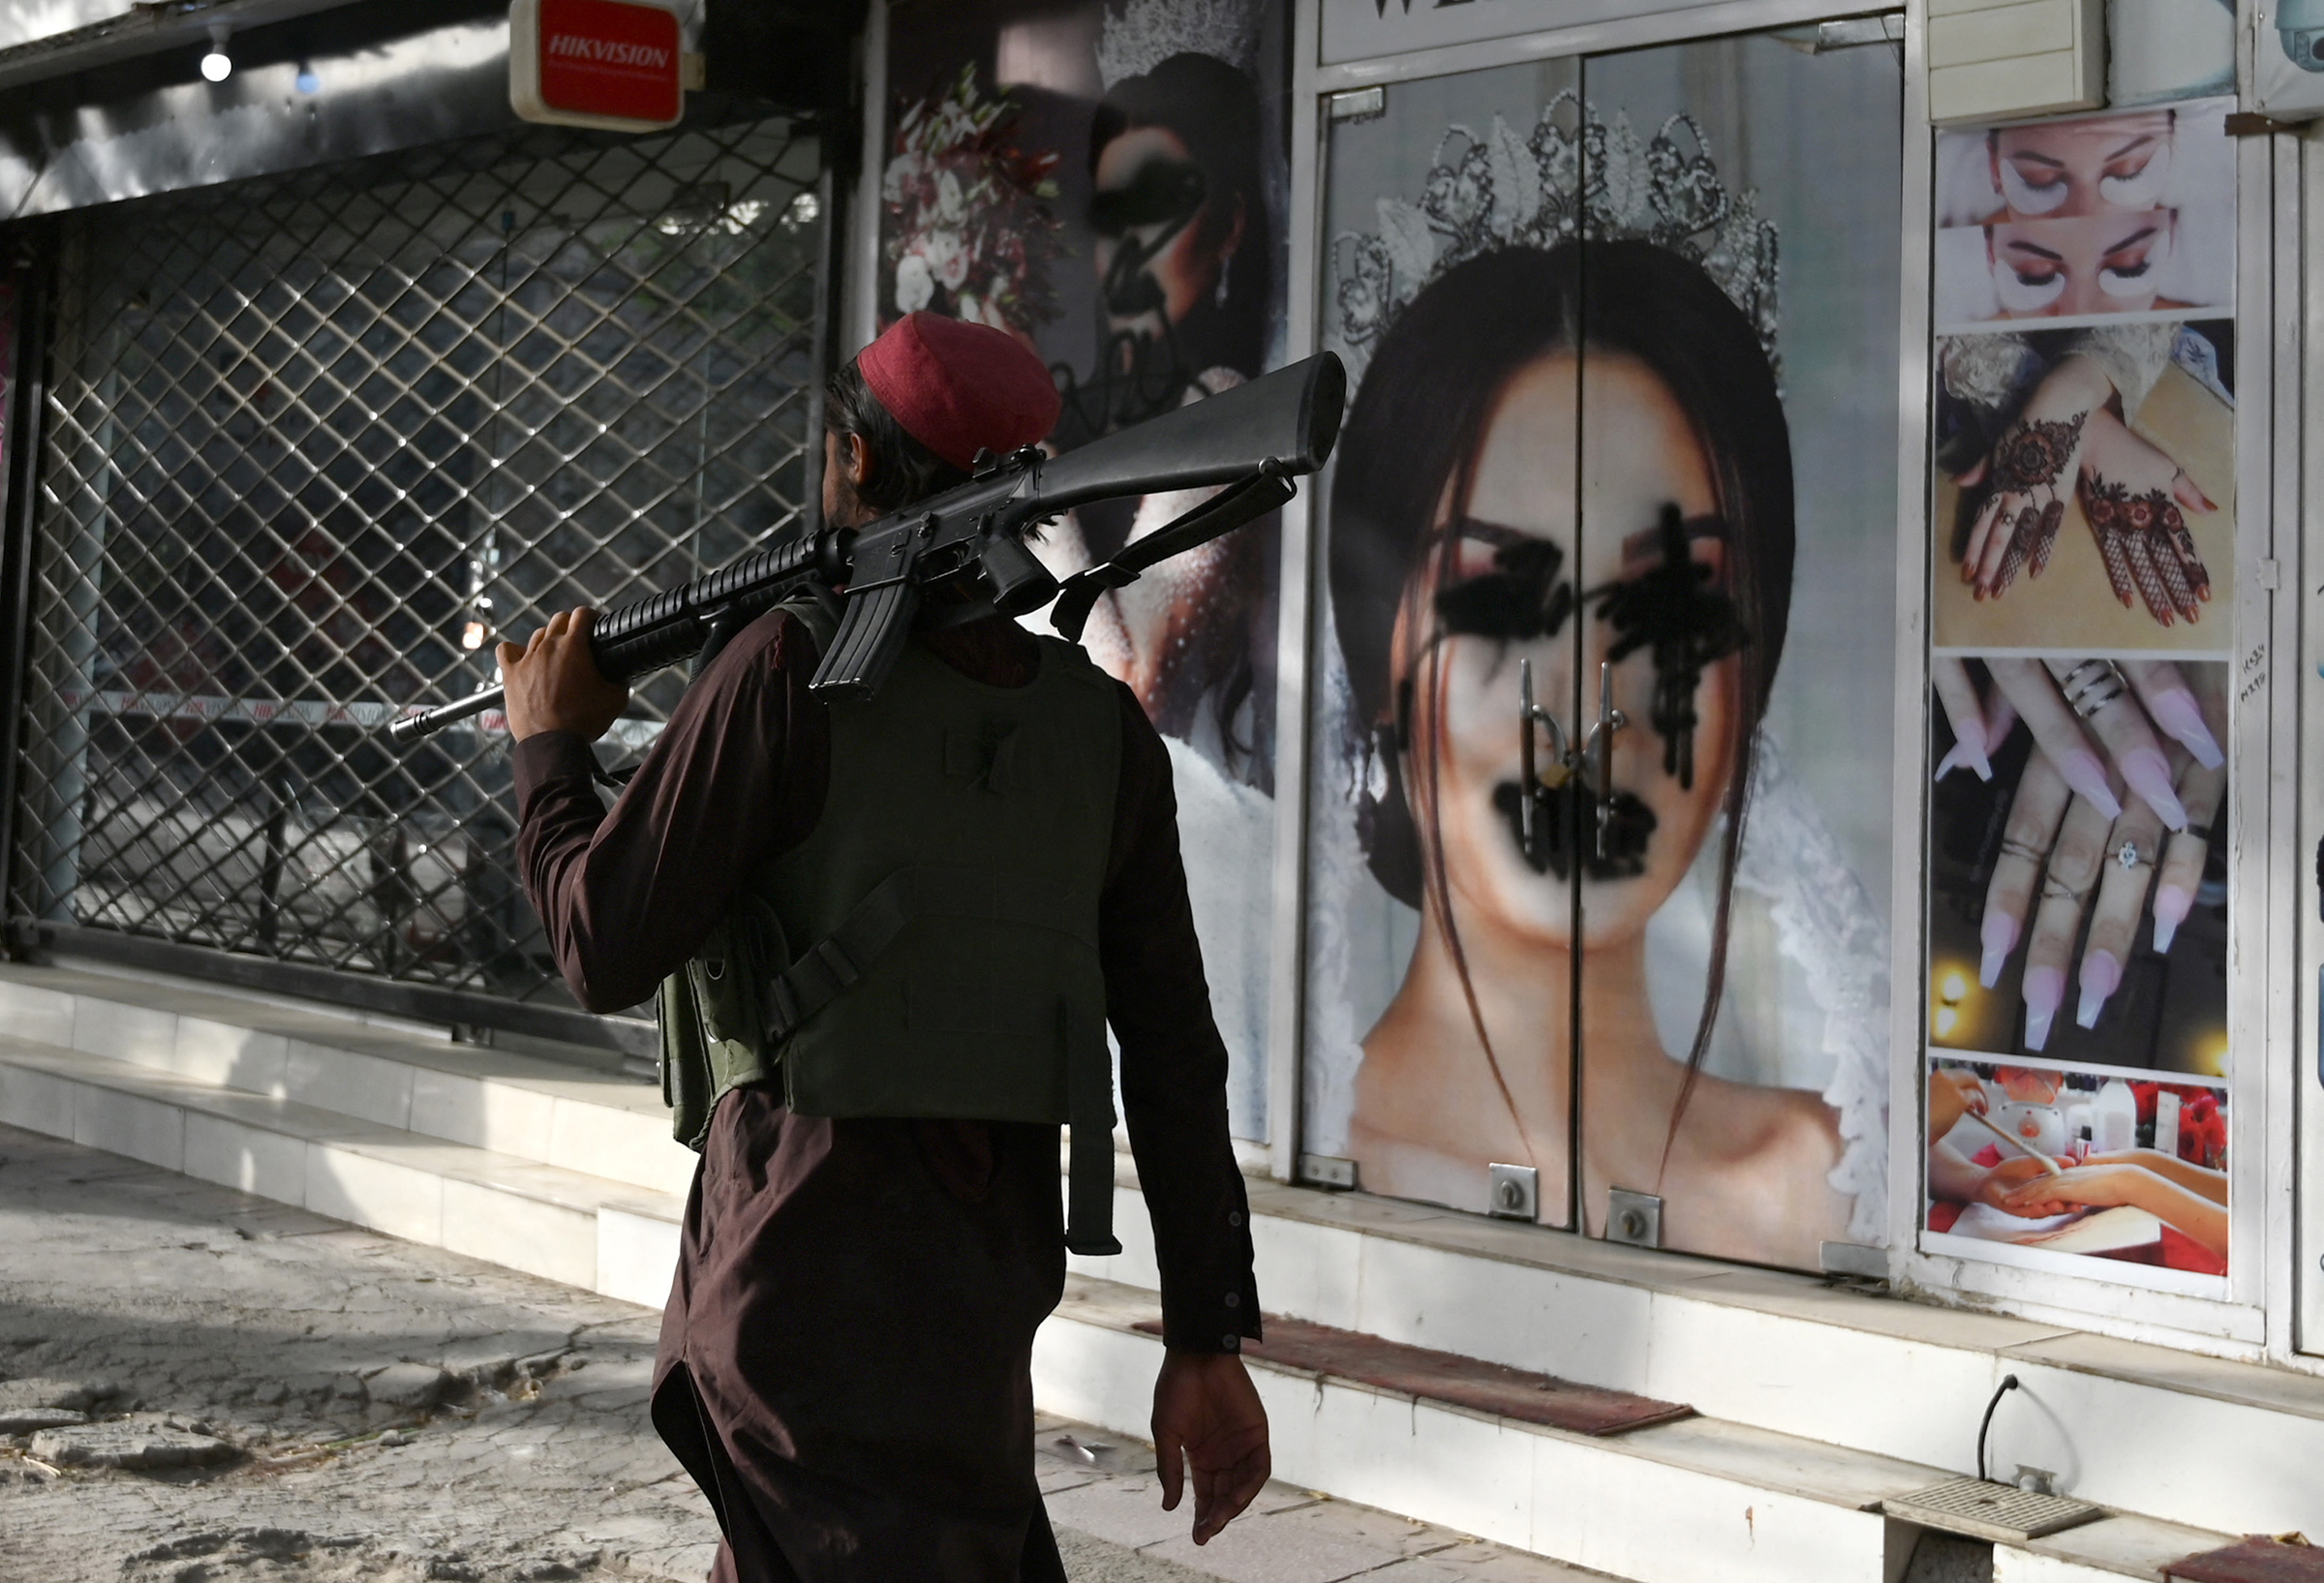 A Taliban fighter walks past a beauty salon with images of women defaced using spray paint in the Shar-e-Naw area of Kabul on Aug. 18. (Wakil Kohsar—AFP/Getty Images)